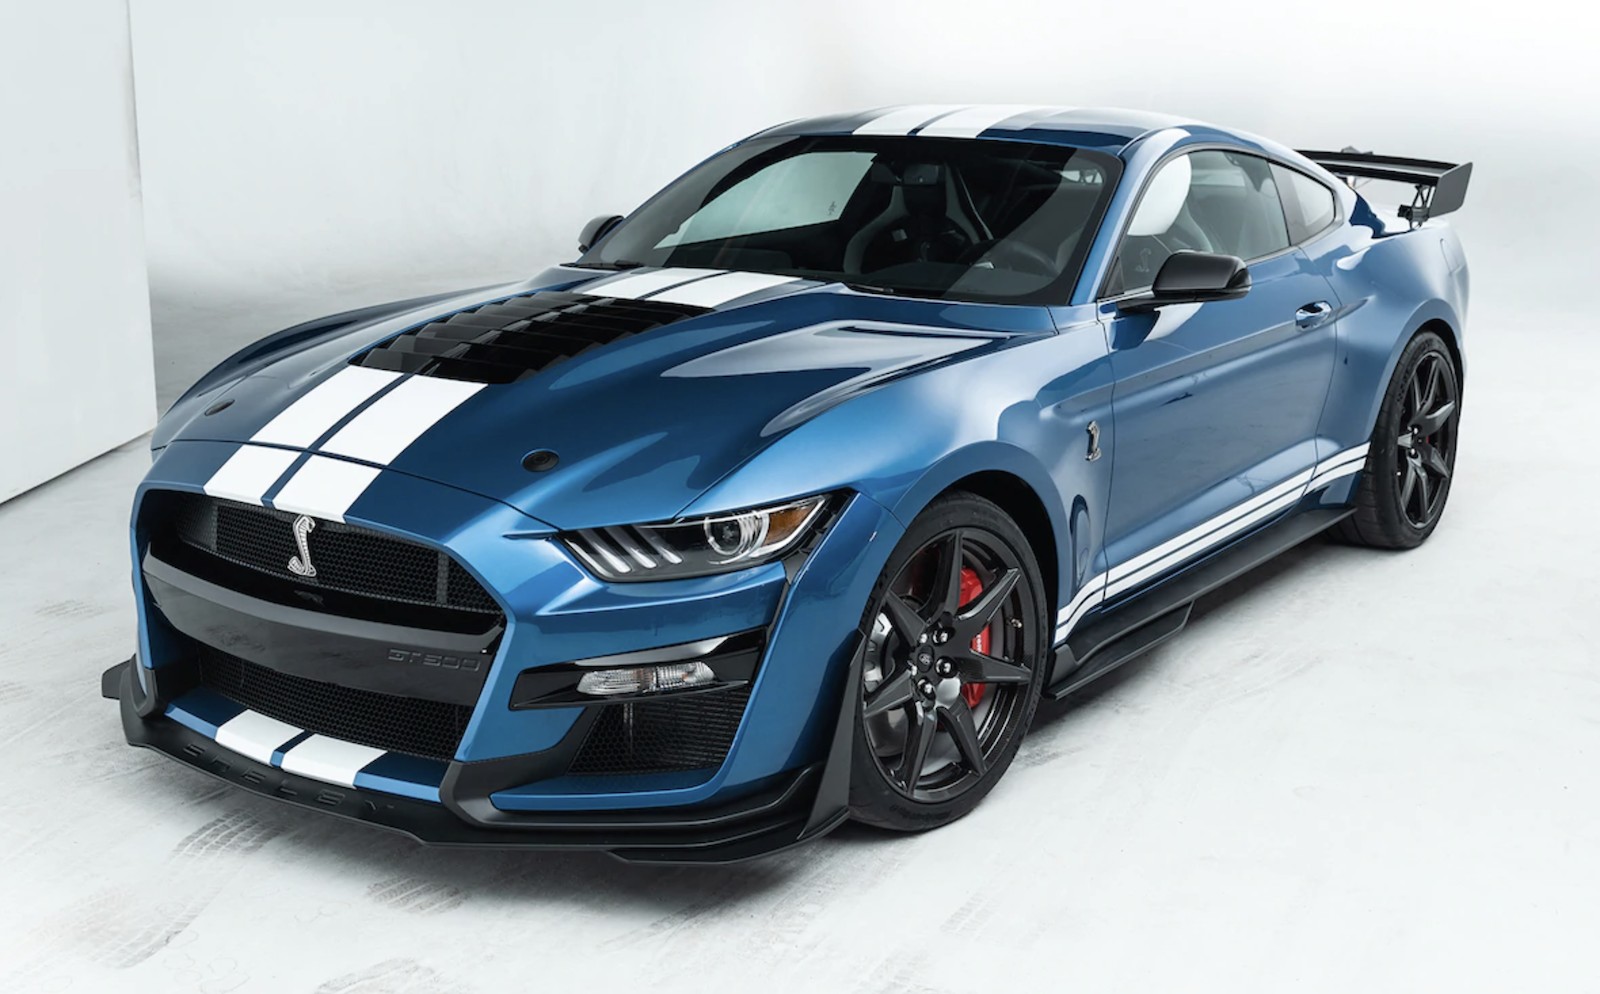 1fa6p8sj1l55 Vin Lookup For 2020 Ford Mustang